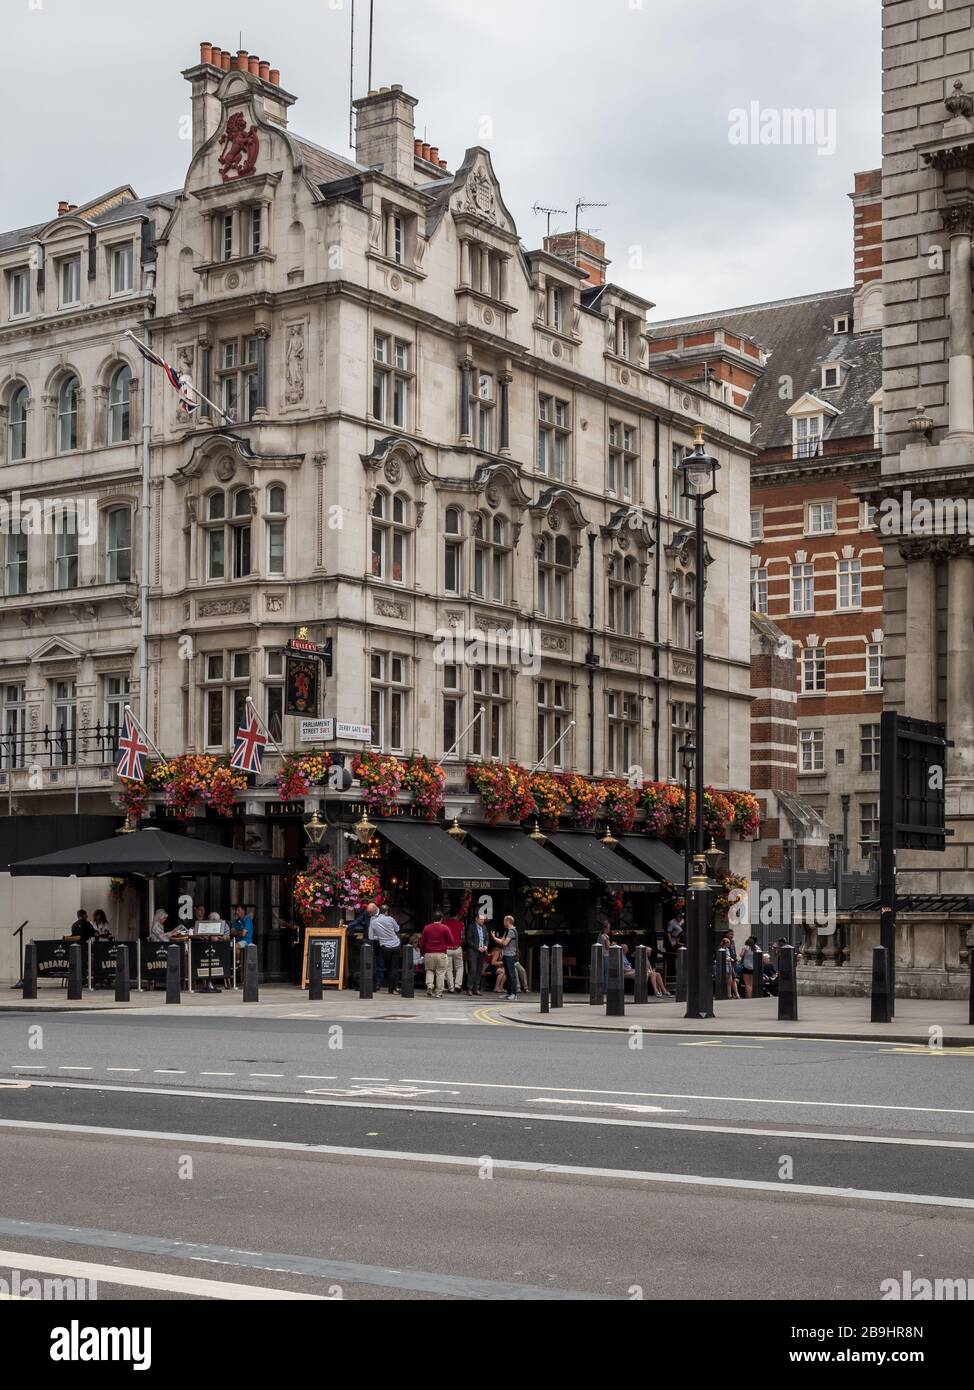 The Red Lion public house. Patrons outside a traditional English pub on Parliament Street in the heart of London's Whitehall district. Stock Photo